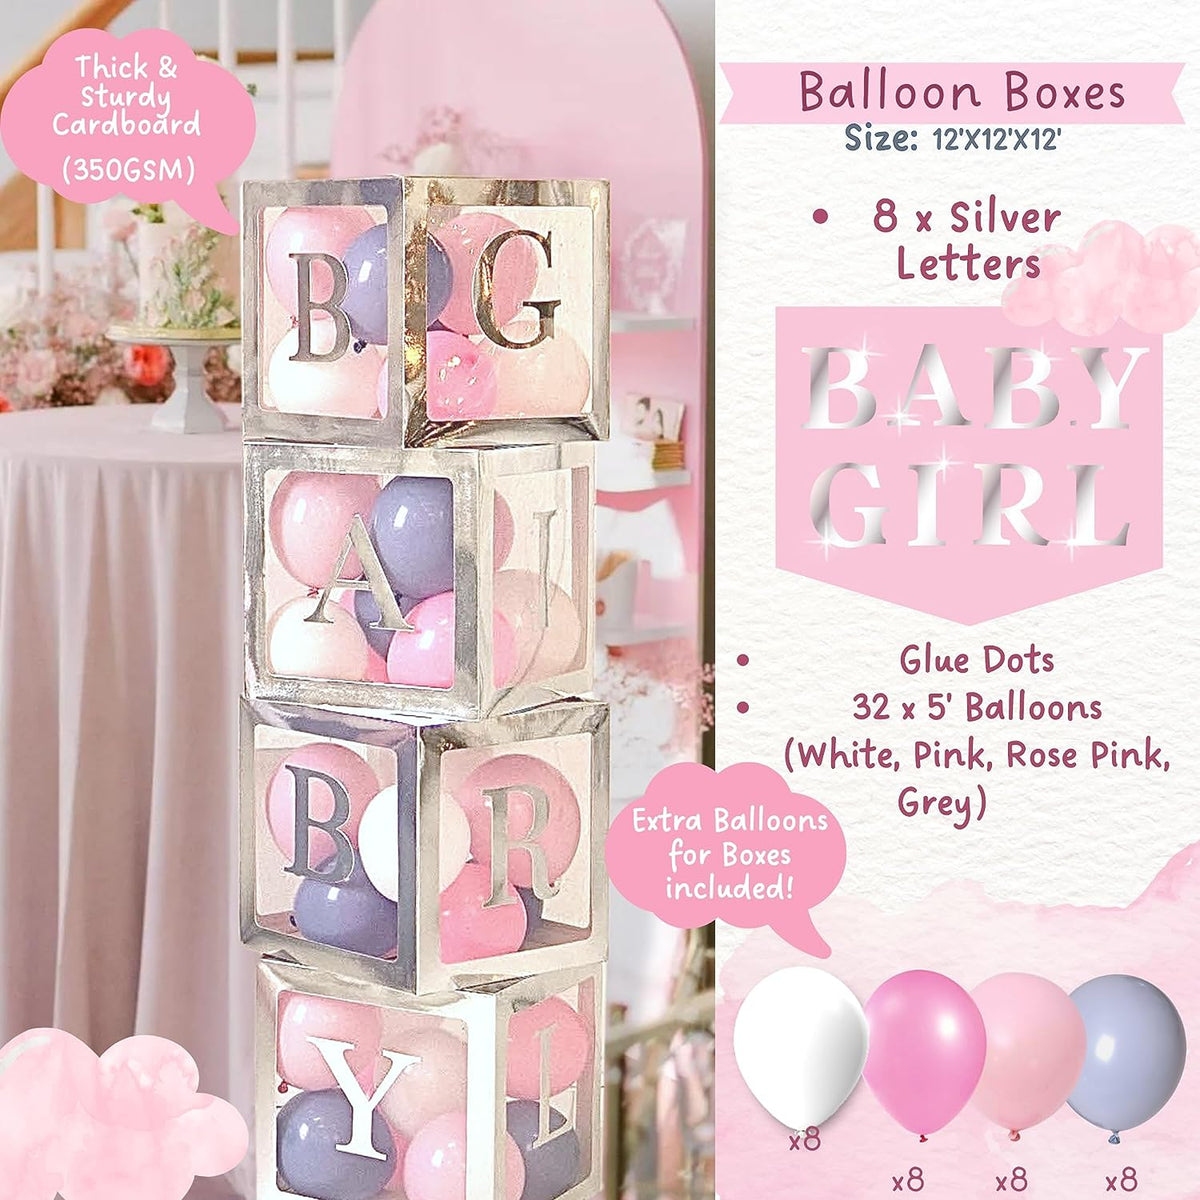 165 pc Baby Shower Decorations for Girl